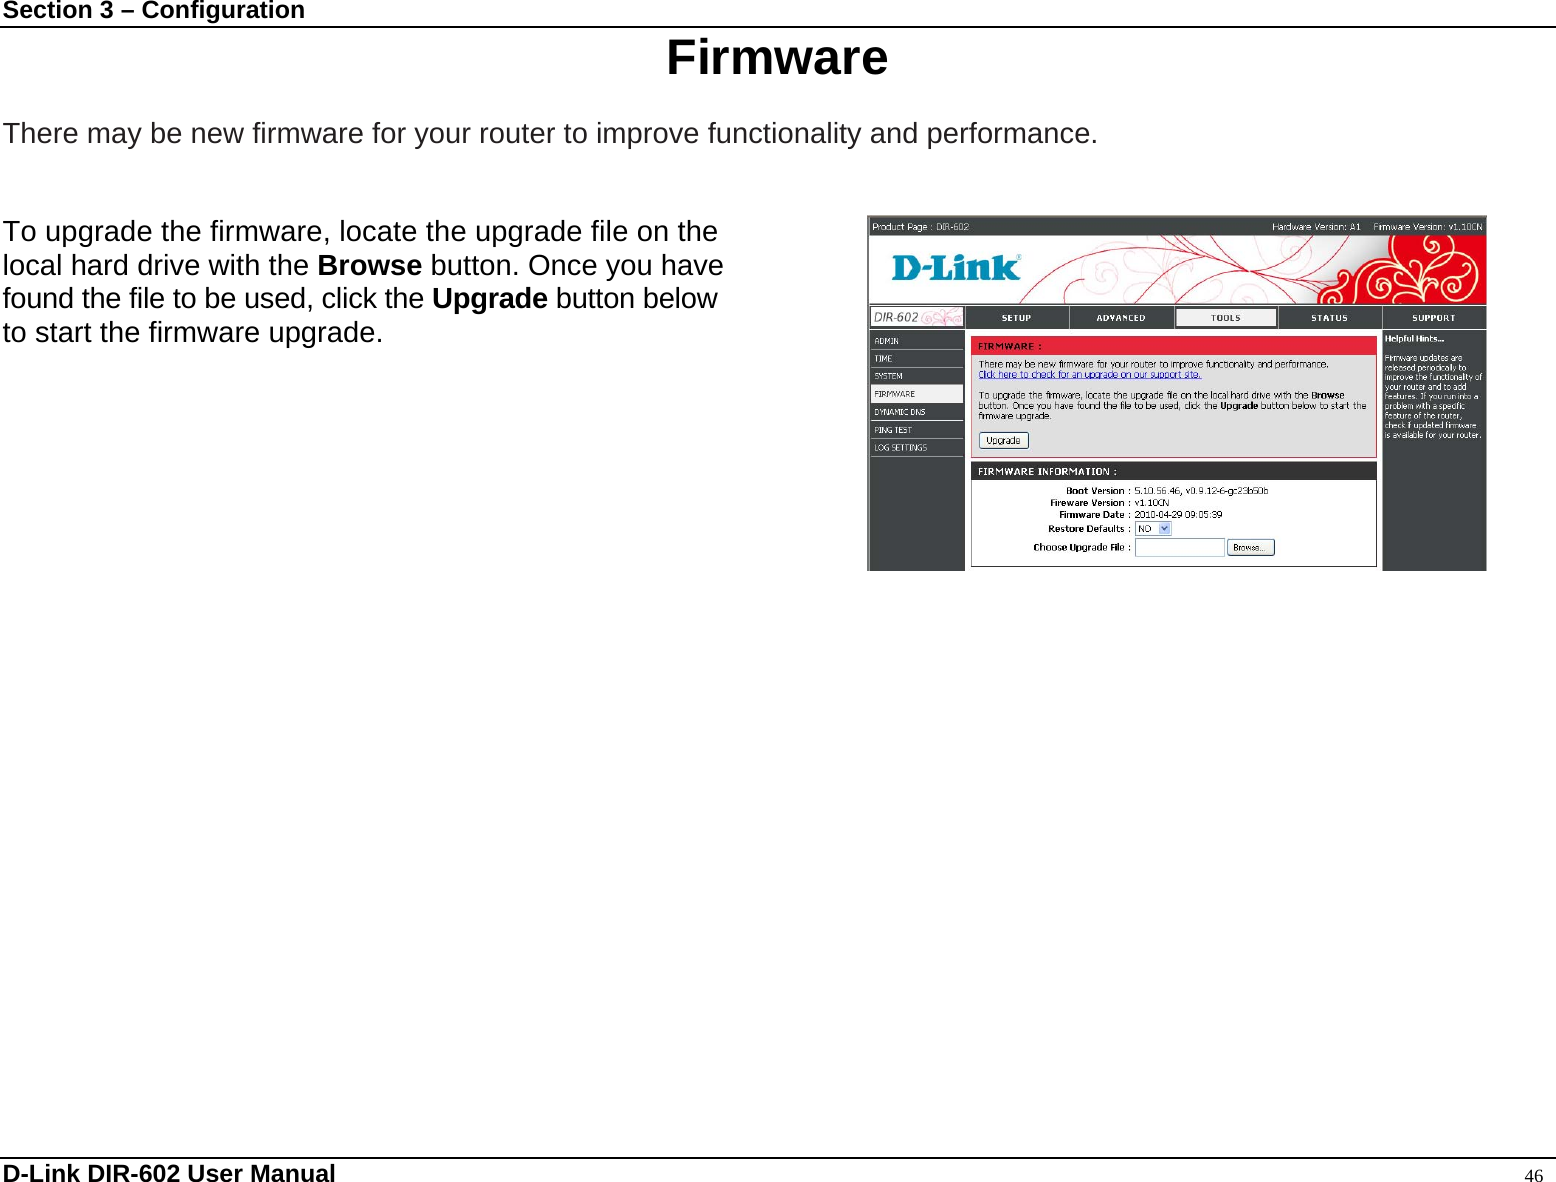 Section 3 – Configuration  Firmware  There may be new firmware for your router to improve functionality and performance.   To upgrade the firmware, locate the upgrade file on the   local hard drive with the Browse button. Once you have found the file to be used, click the Upgrade button below to start the firmware upgrade.          D-Link DIR-602 User Manual                                                                                               46 